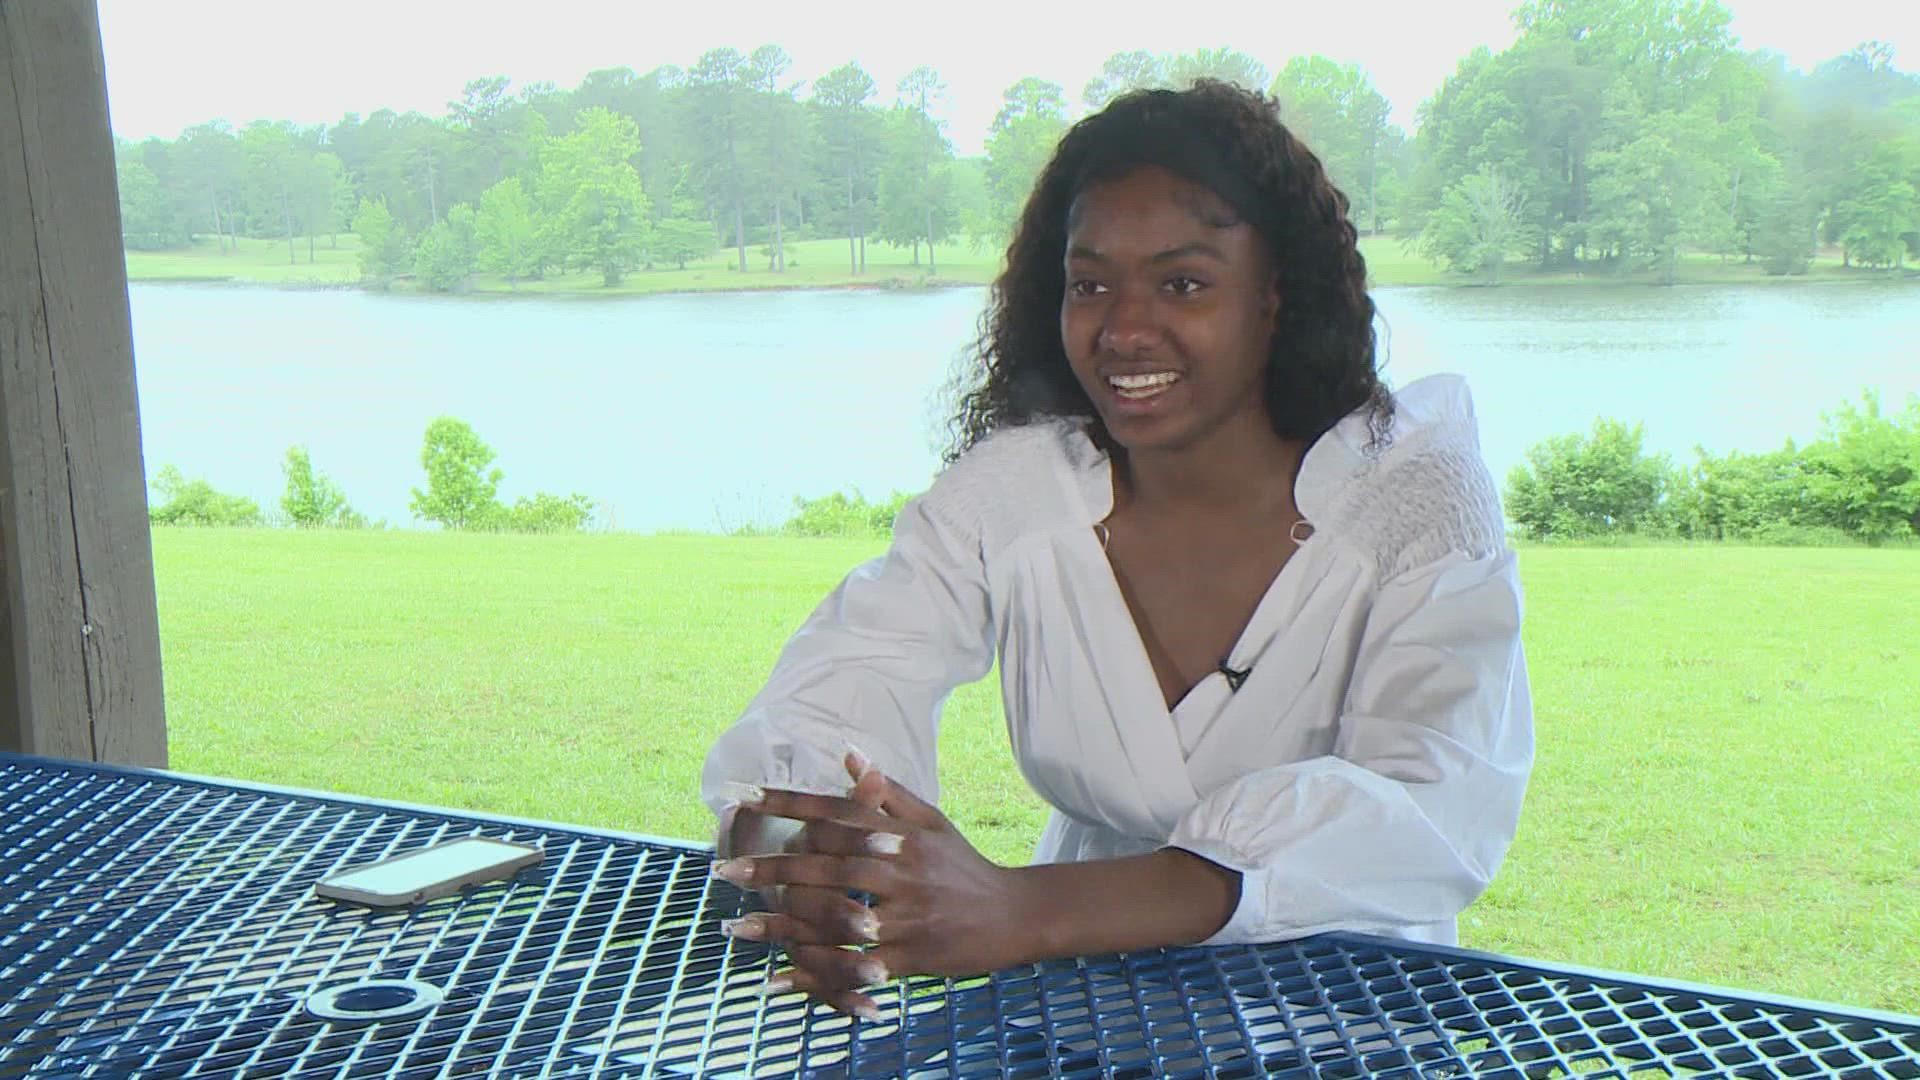 Wilnedia Flourves pushed through self-doubt and her family’s financial struggles to find money for college.